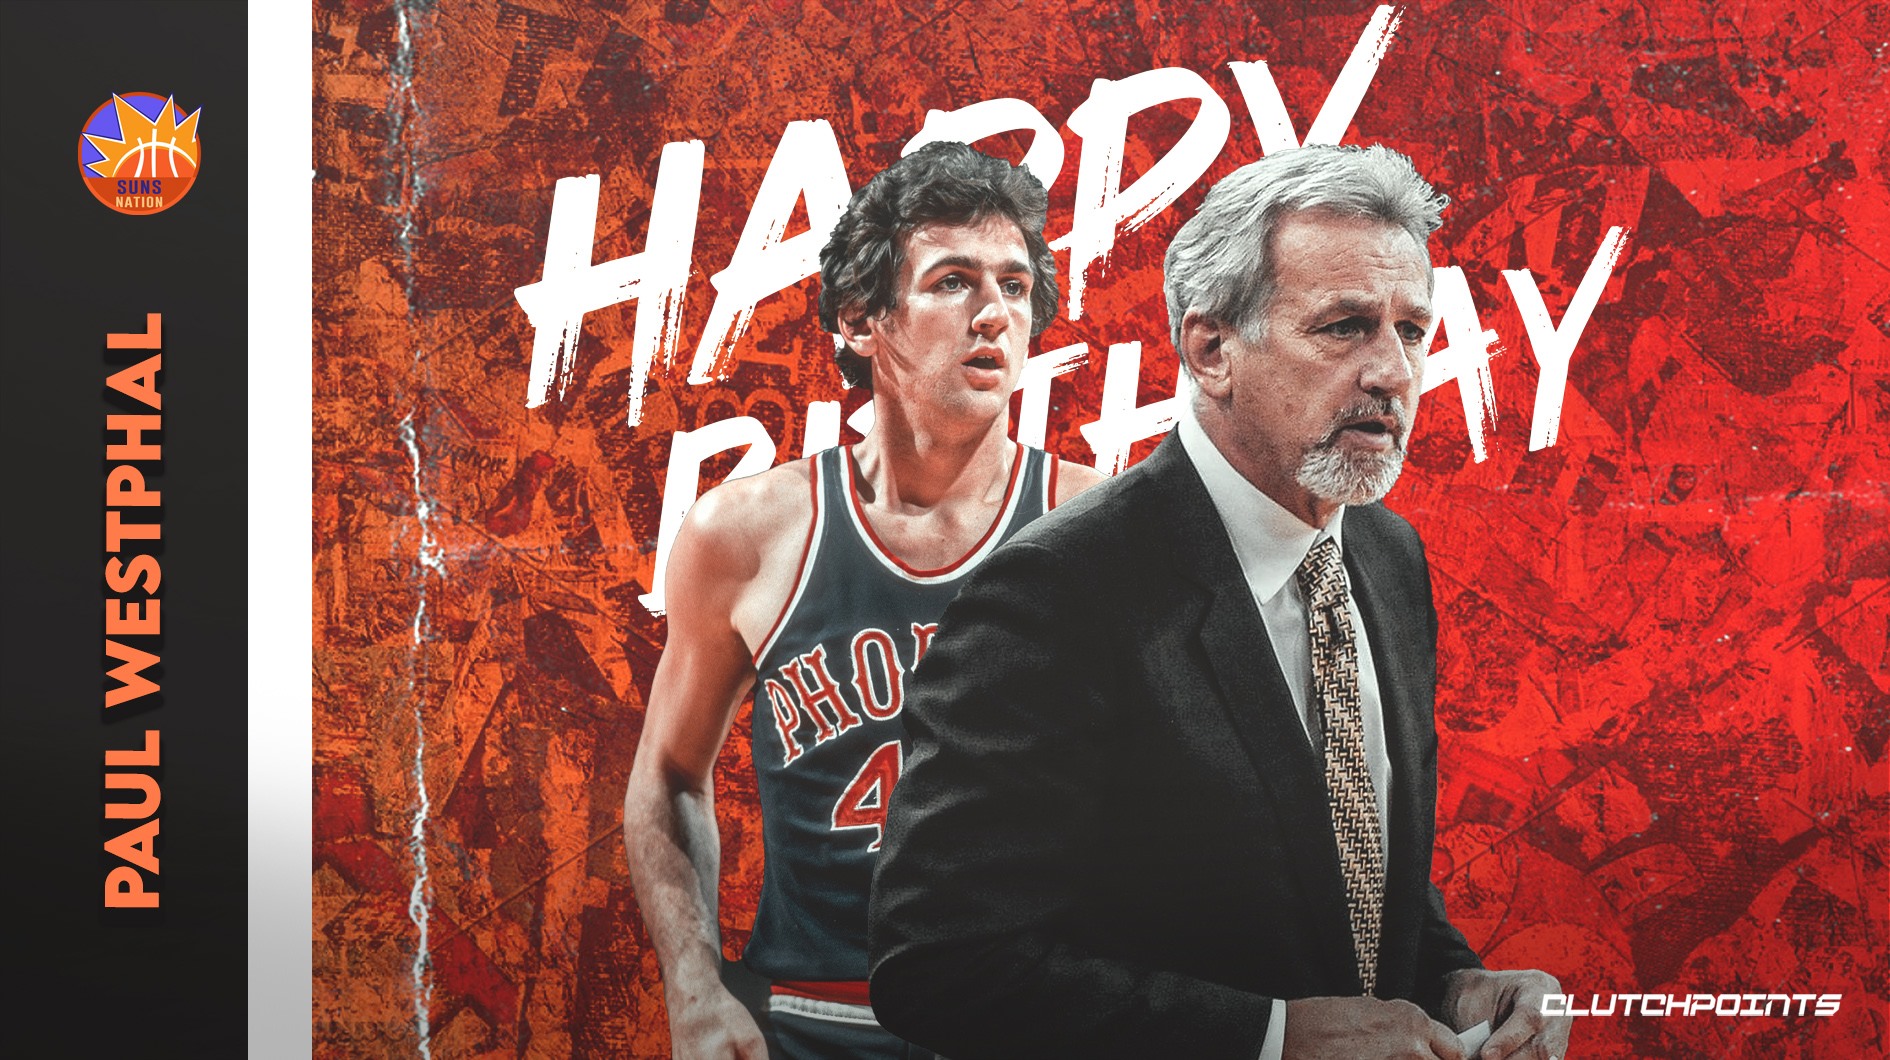 Suns Nation, join us in wishing Paul Westphal a happy 70th birthday! 